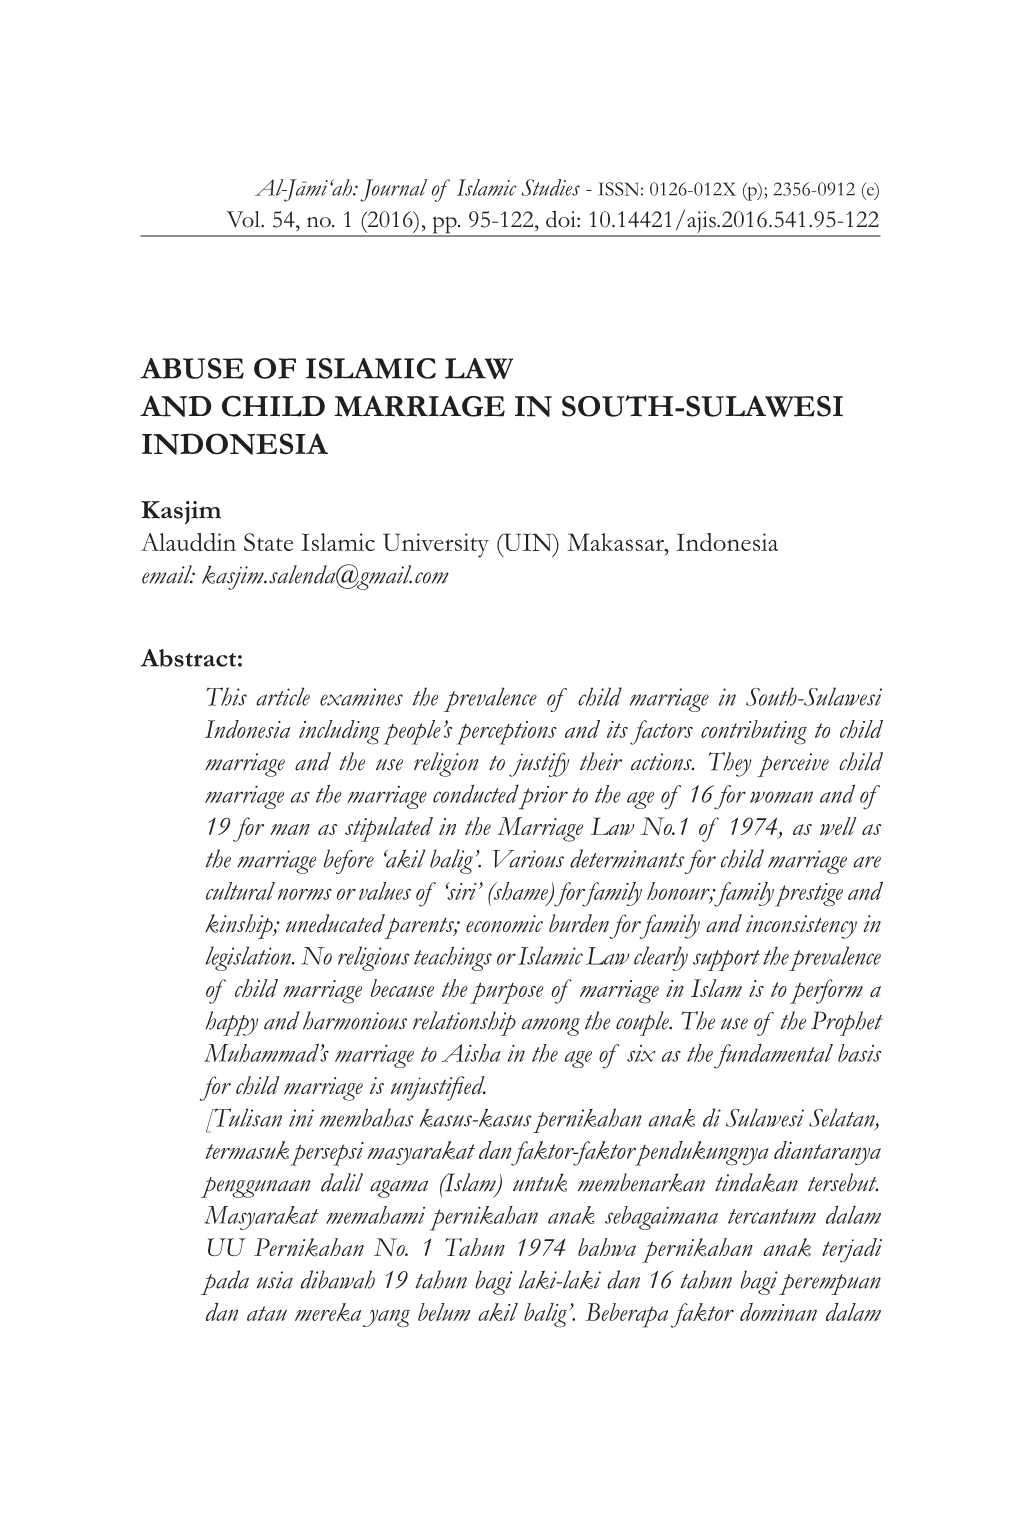 Abuse of Islamic Law and Child Marriage in South-Sulawesi Indonesia